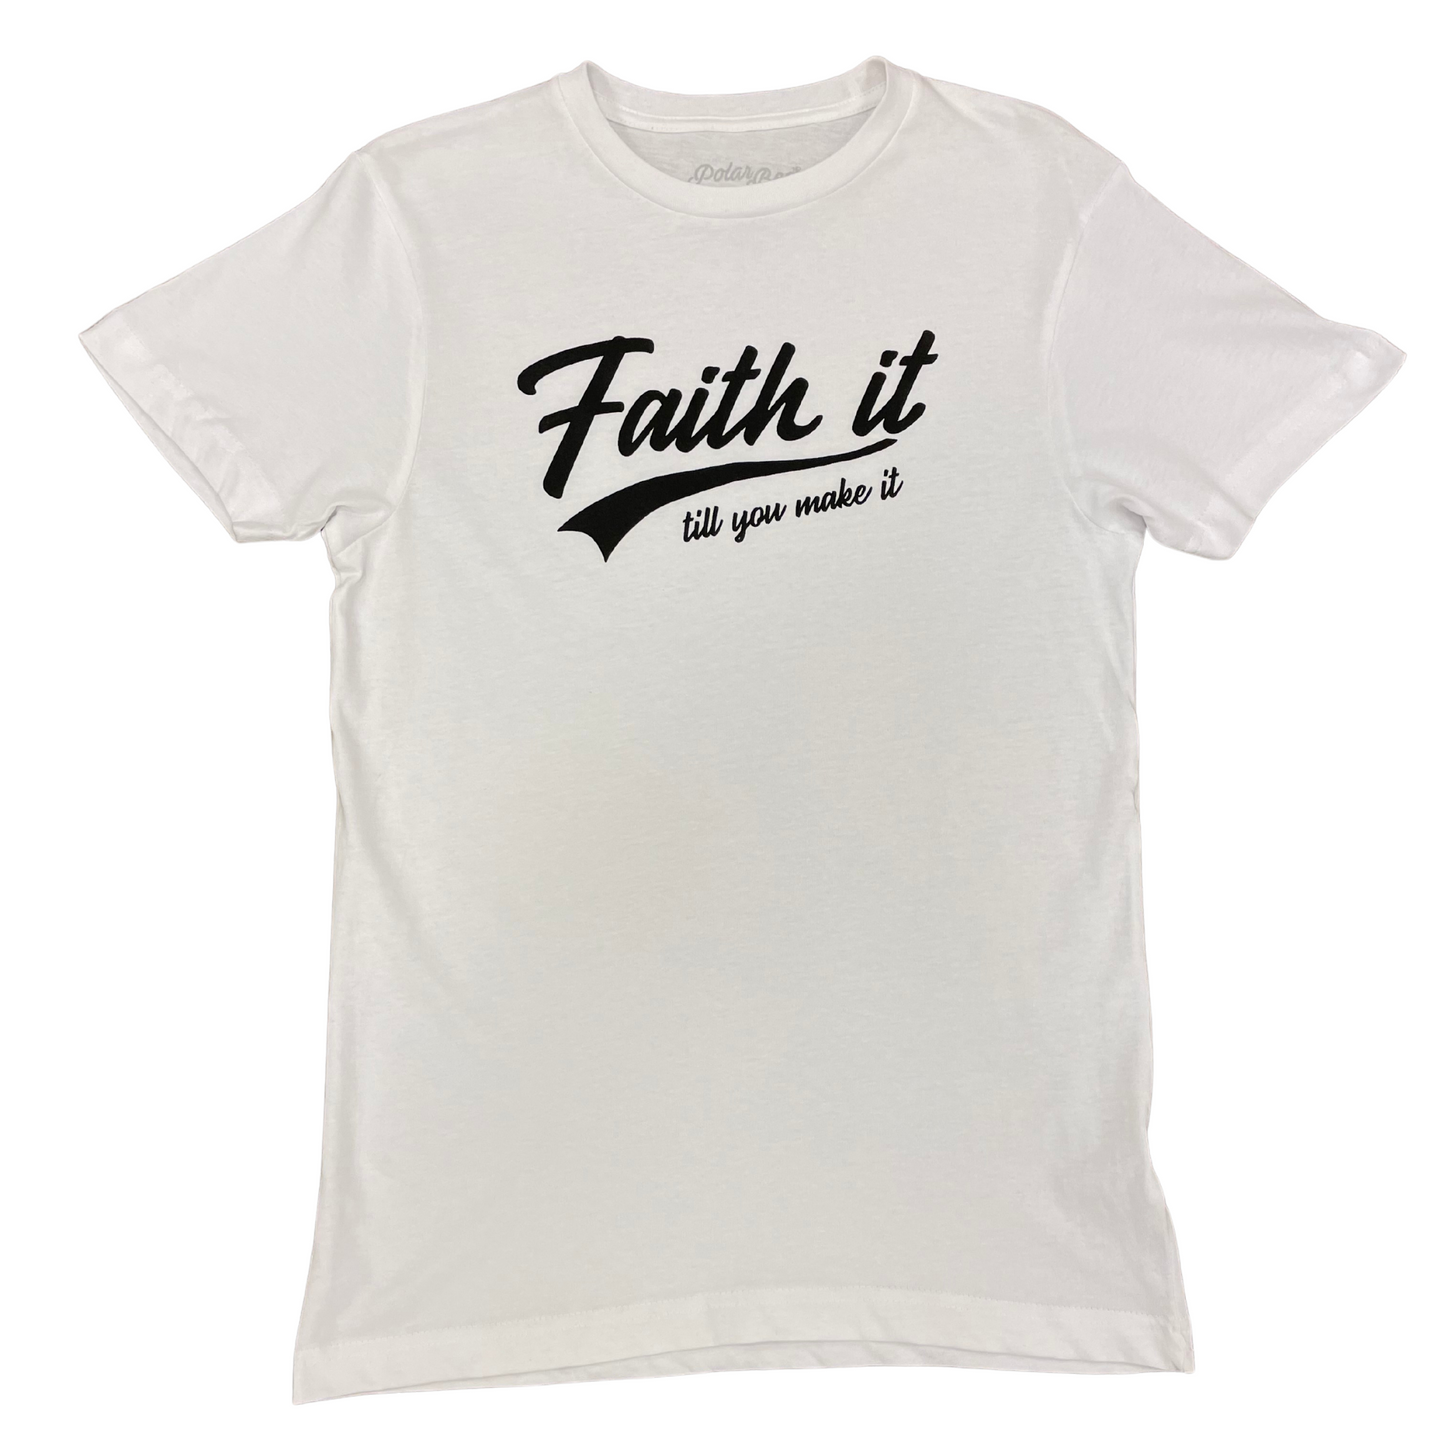 "Faith It Till You Make It" Graphic Tee White or Black (S-XL)